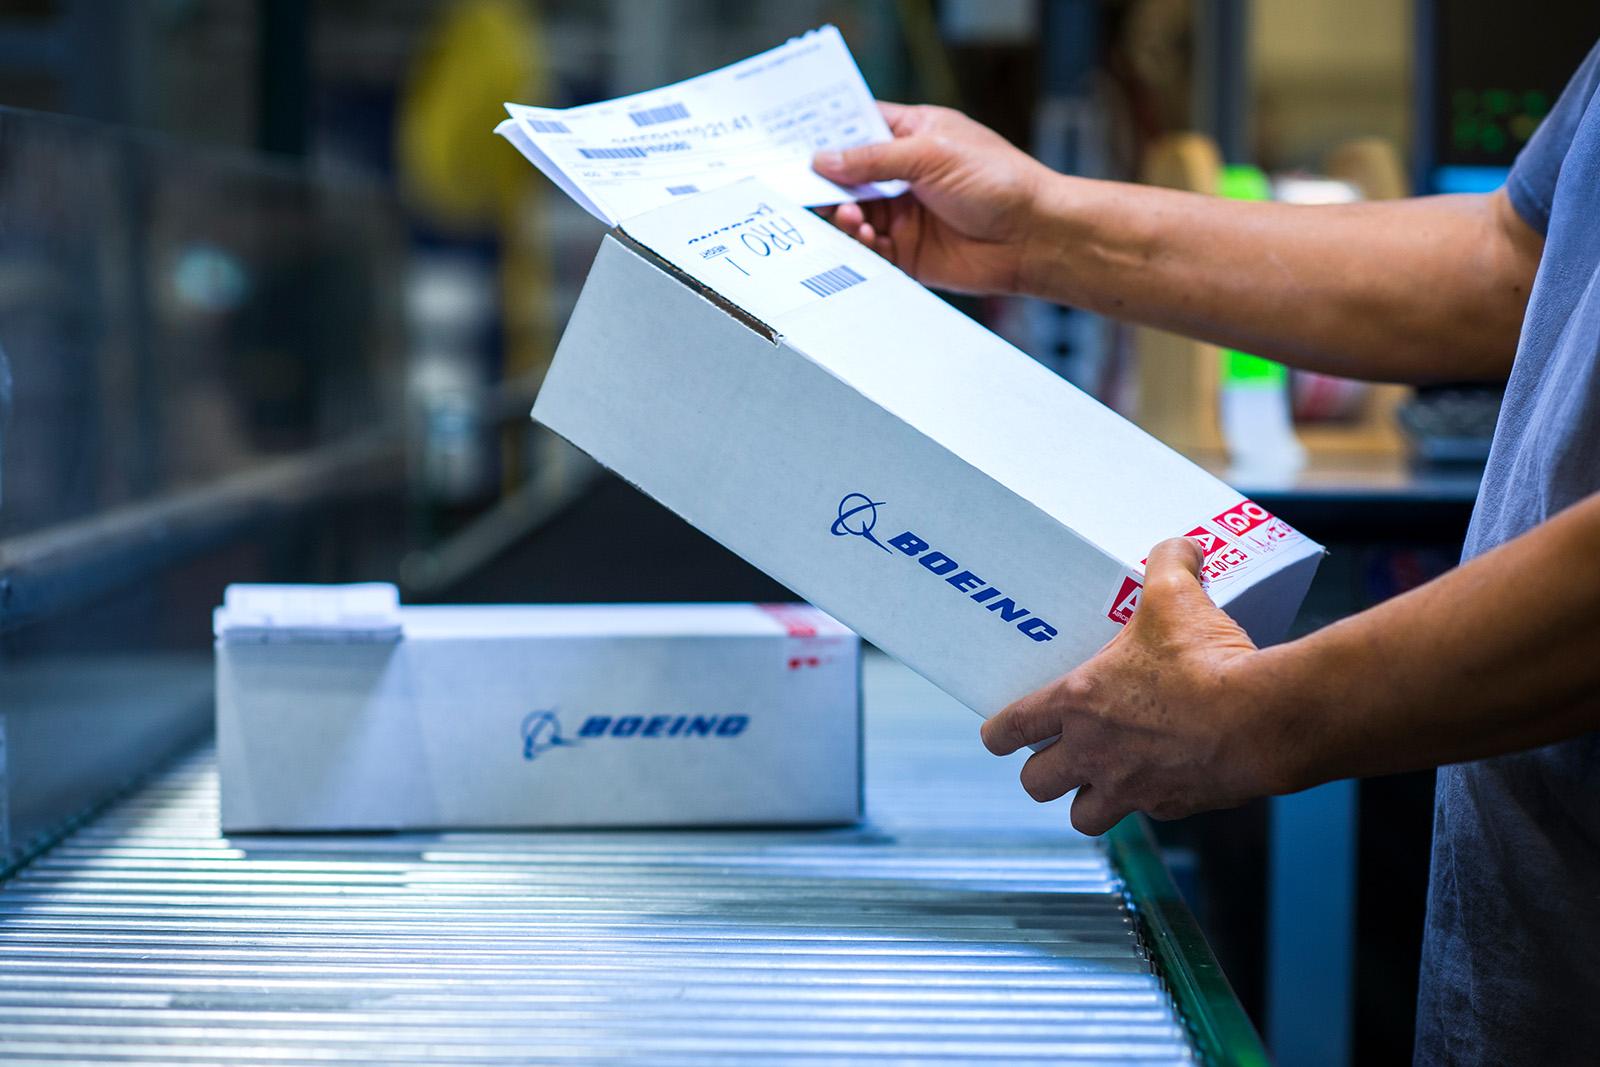 Boeing parts ordering